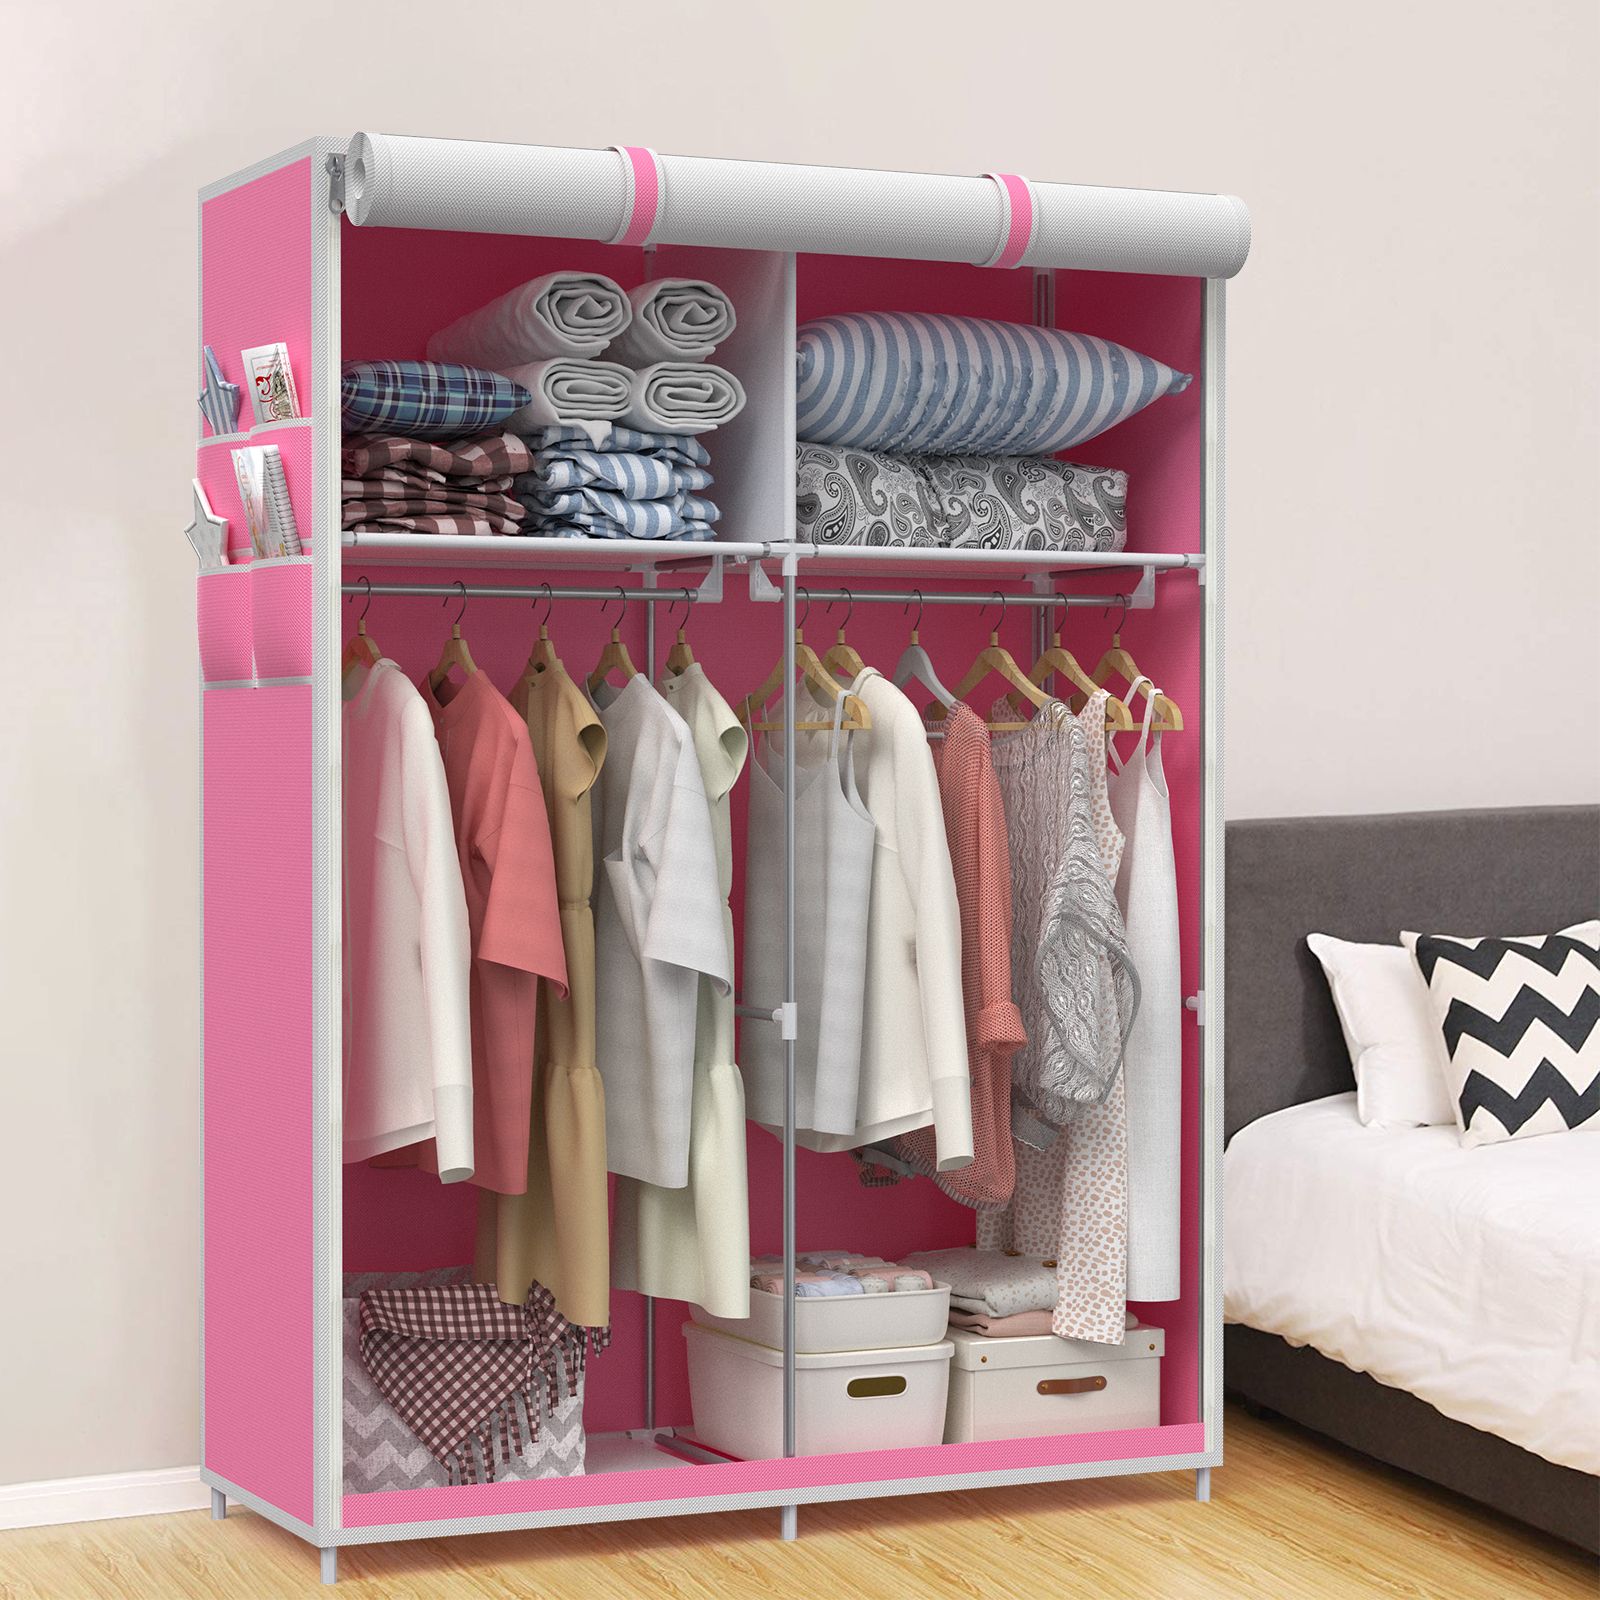 Double Fabric Canvas Wardrobe With Clothes Hanging Rail Storage Shelves  Cupboard | Ebay Pertaining To Double Rail Canvas Wardrobes (Gallery 17 of 20)